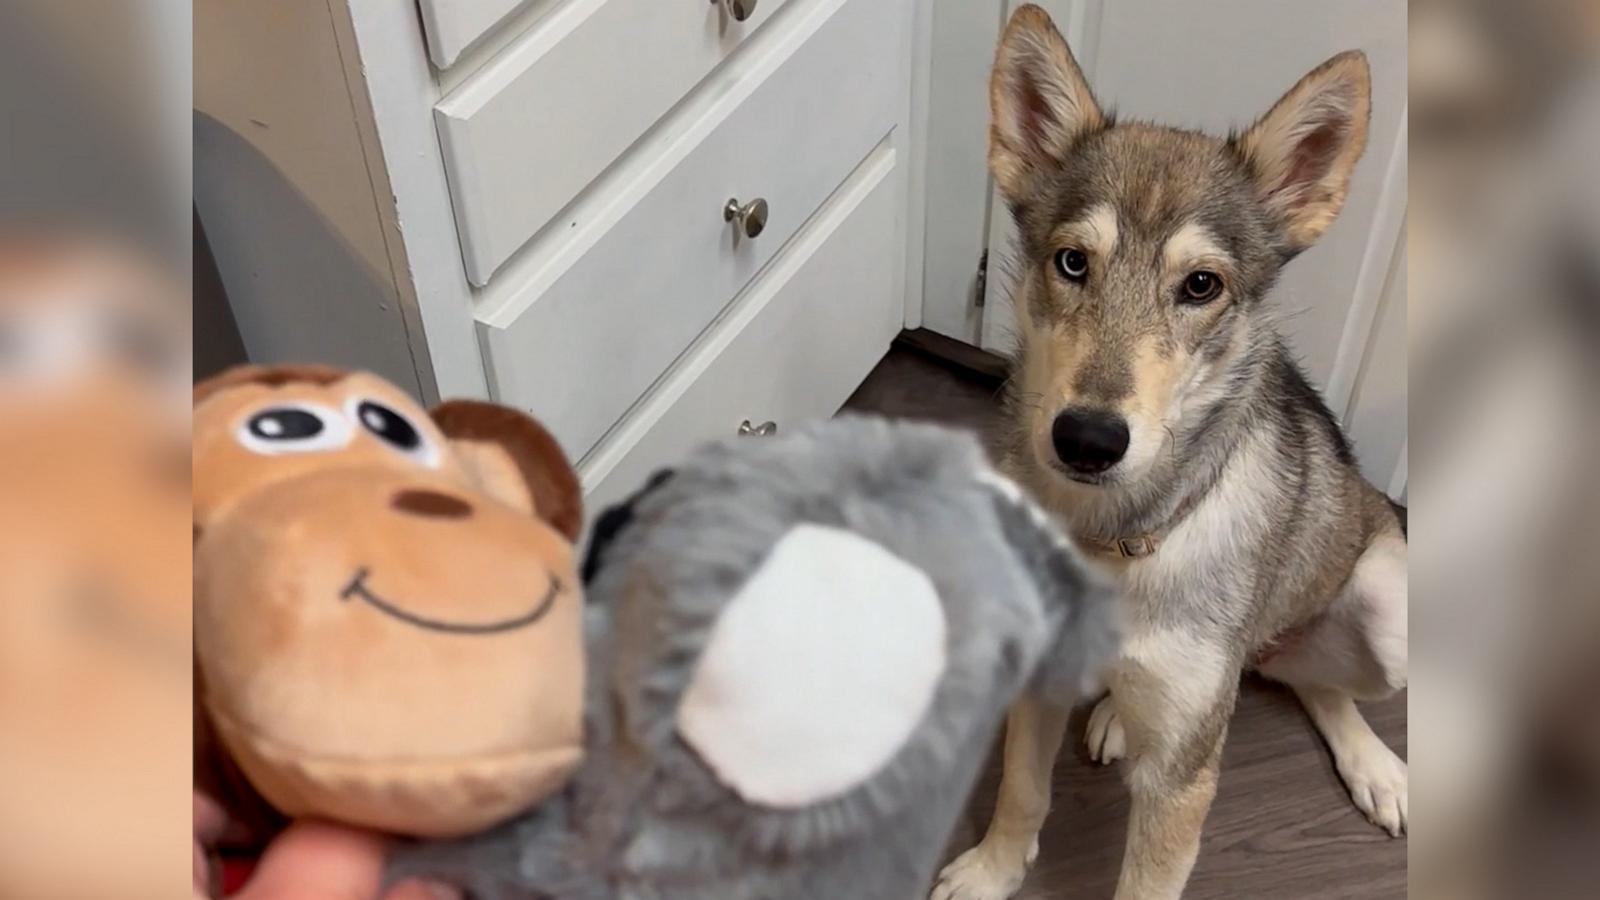 Watch the sweet moment this rescue dog plays with its toy for the 1st time